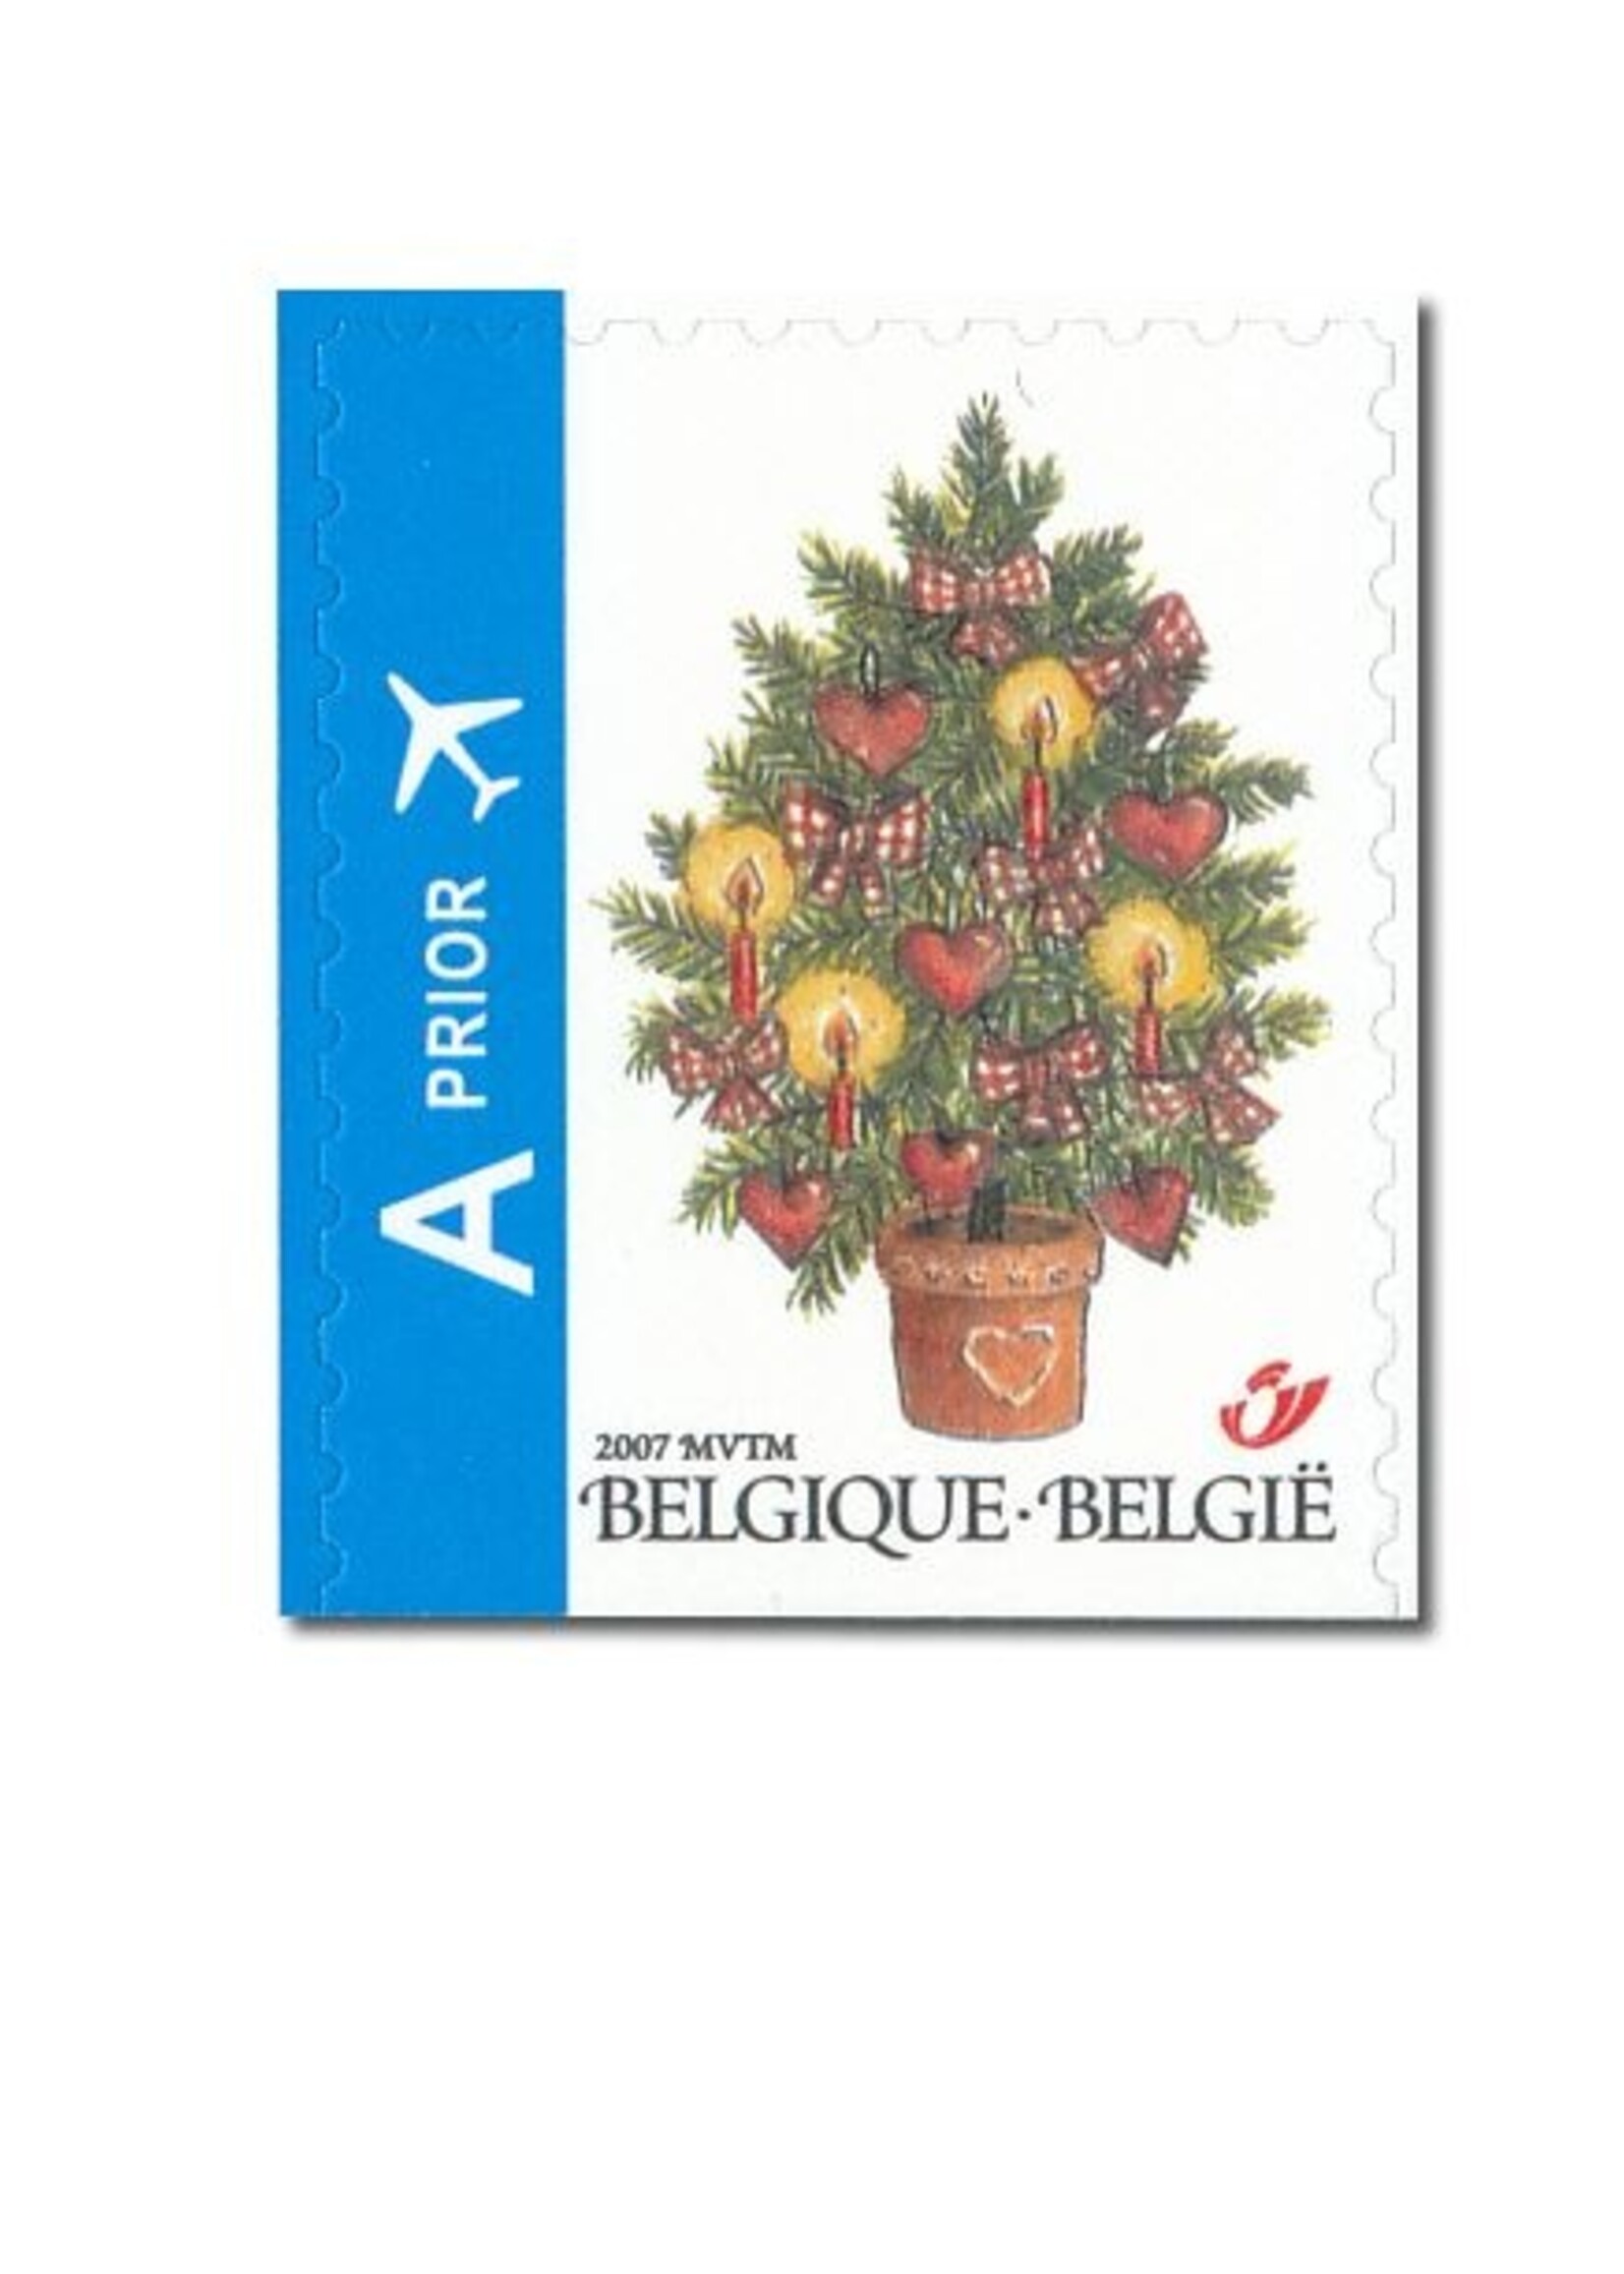 World Christmas - Booklet with 10 stamps - Rate 1